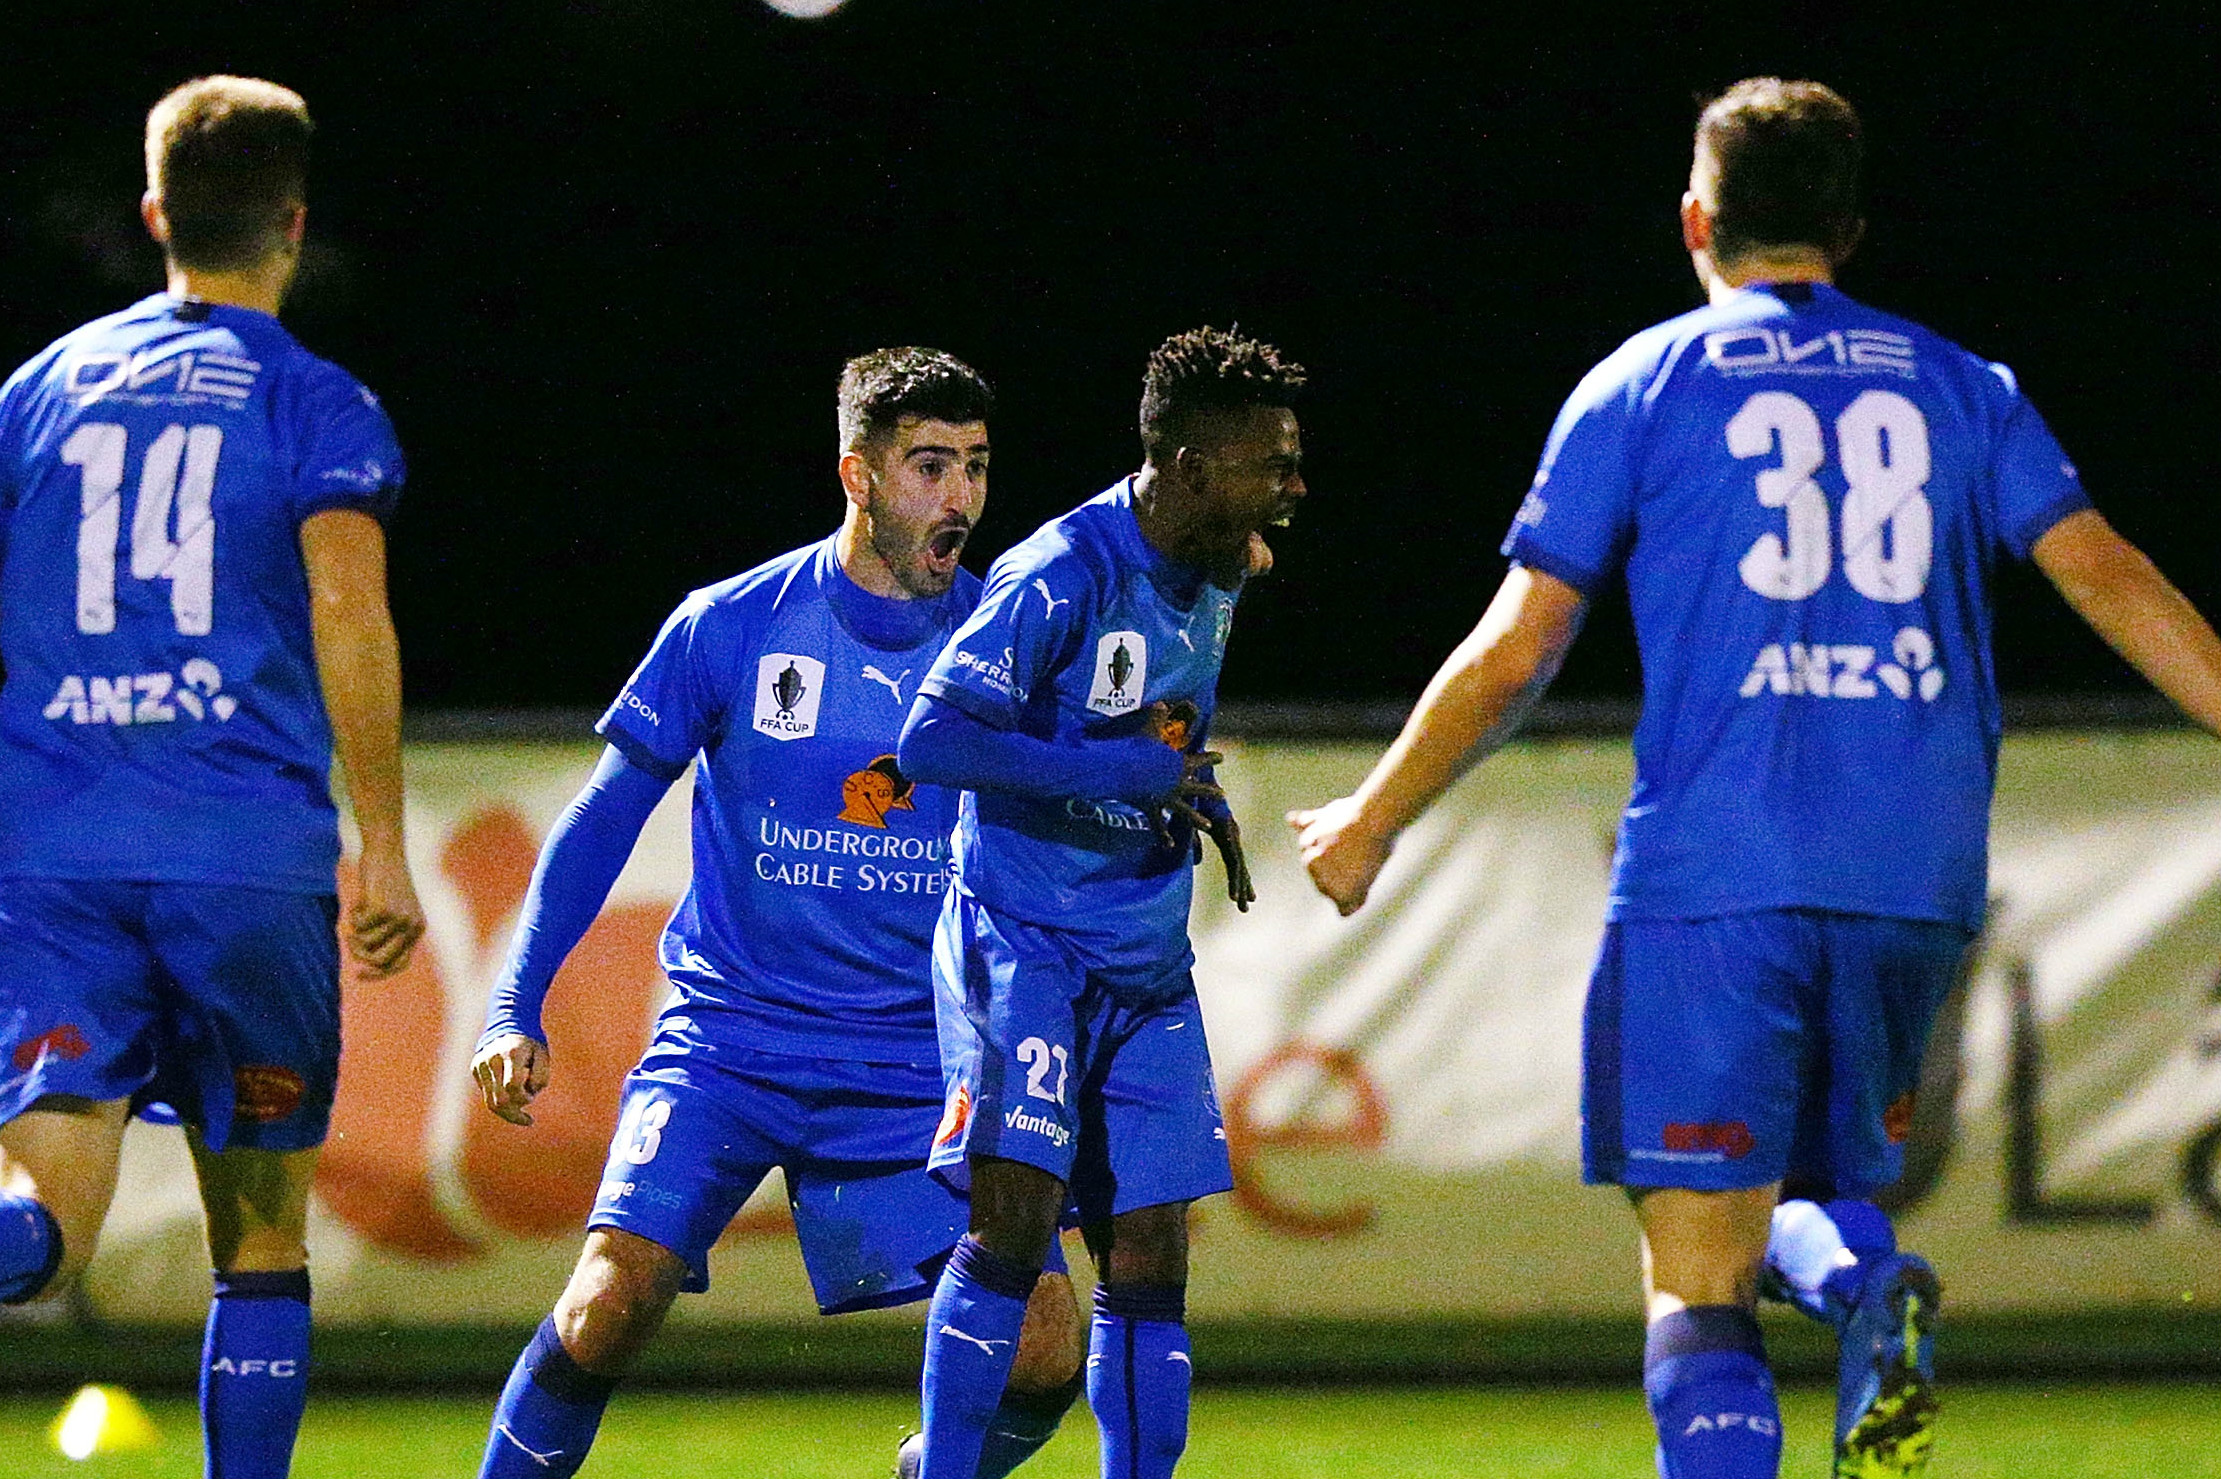 Kamsoba celebrates a goal in this year's FFA Cup.